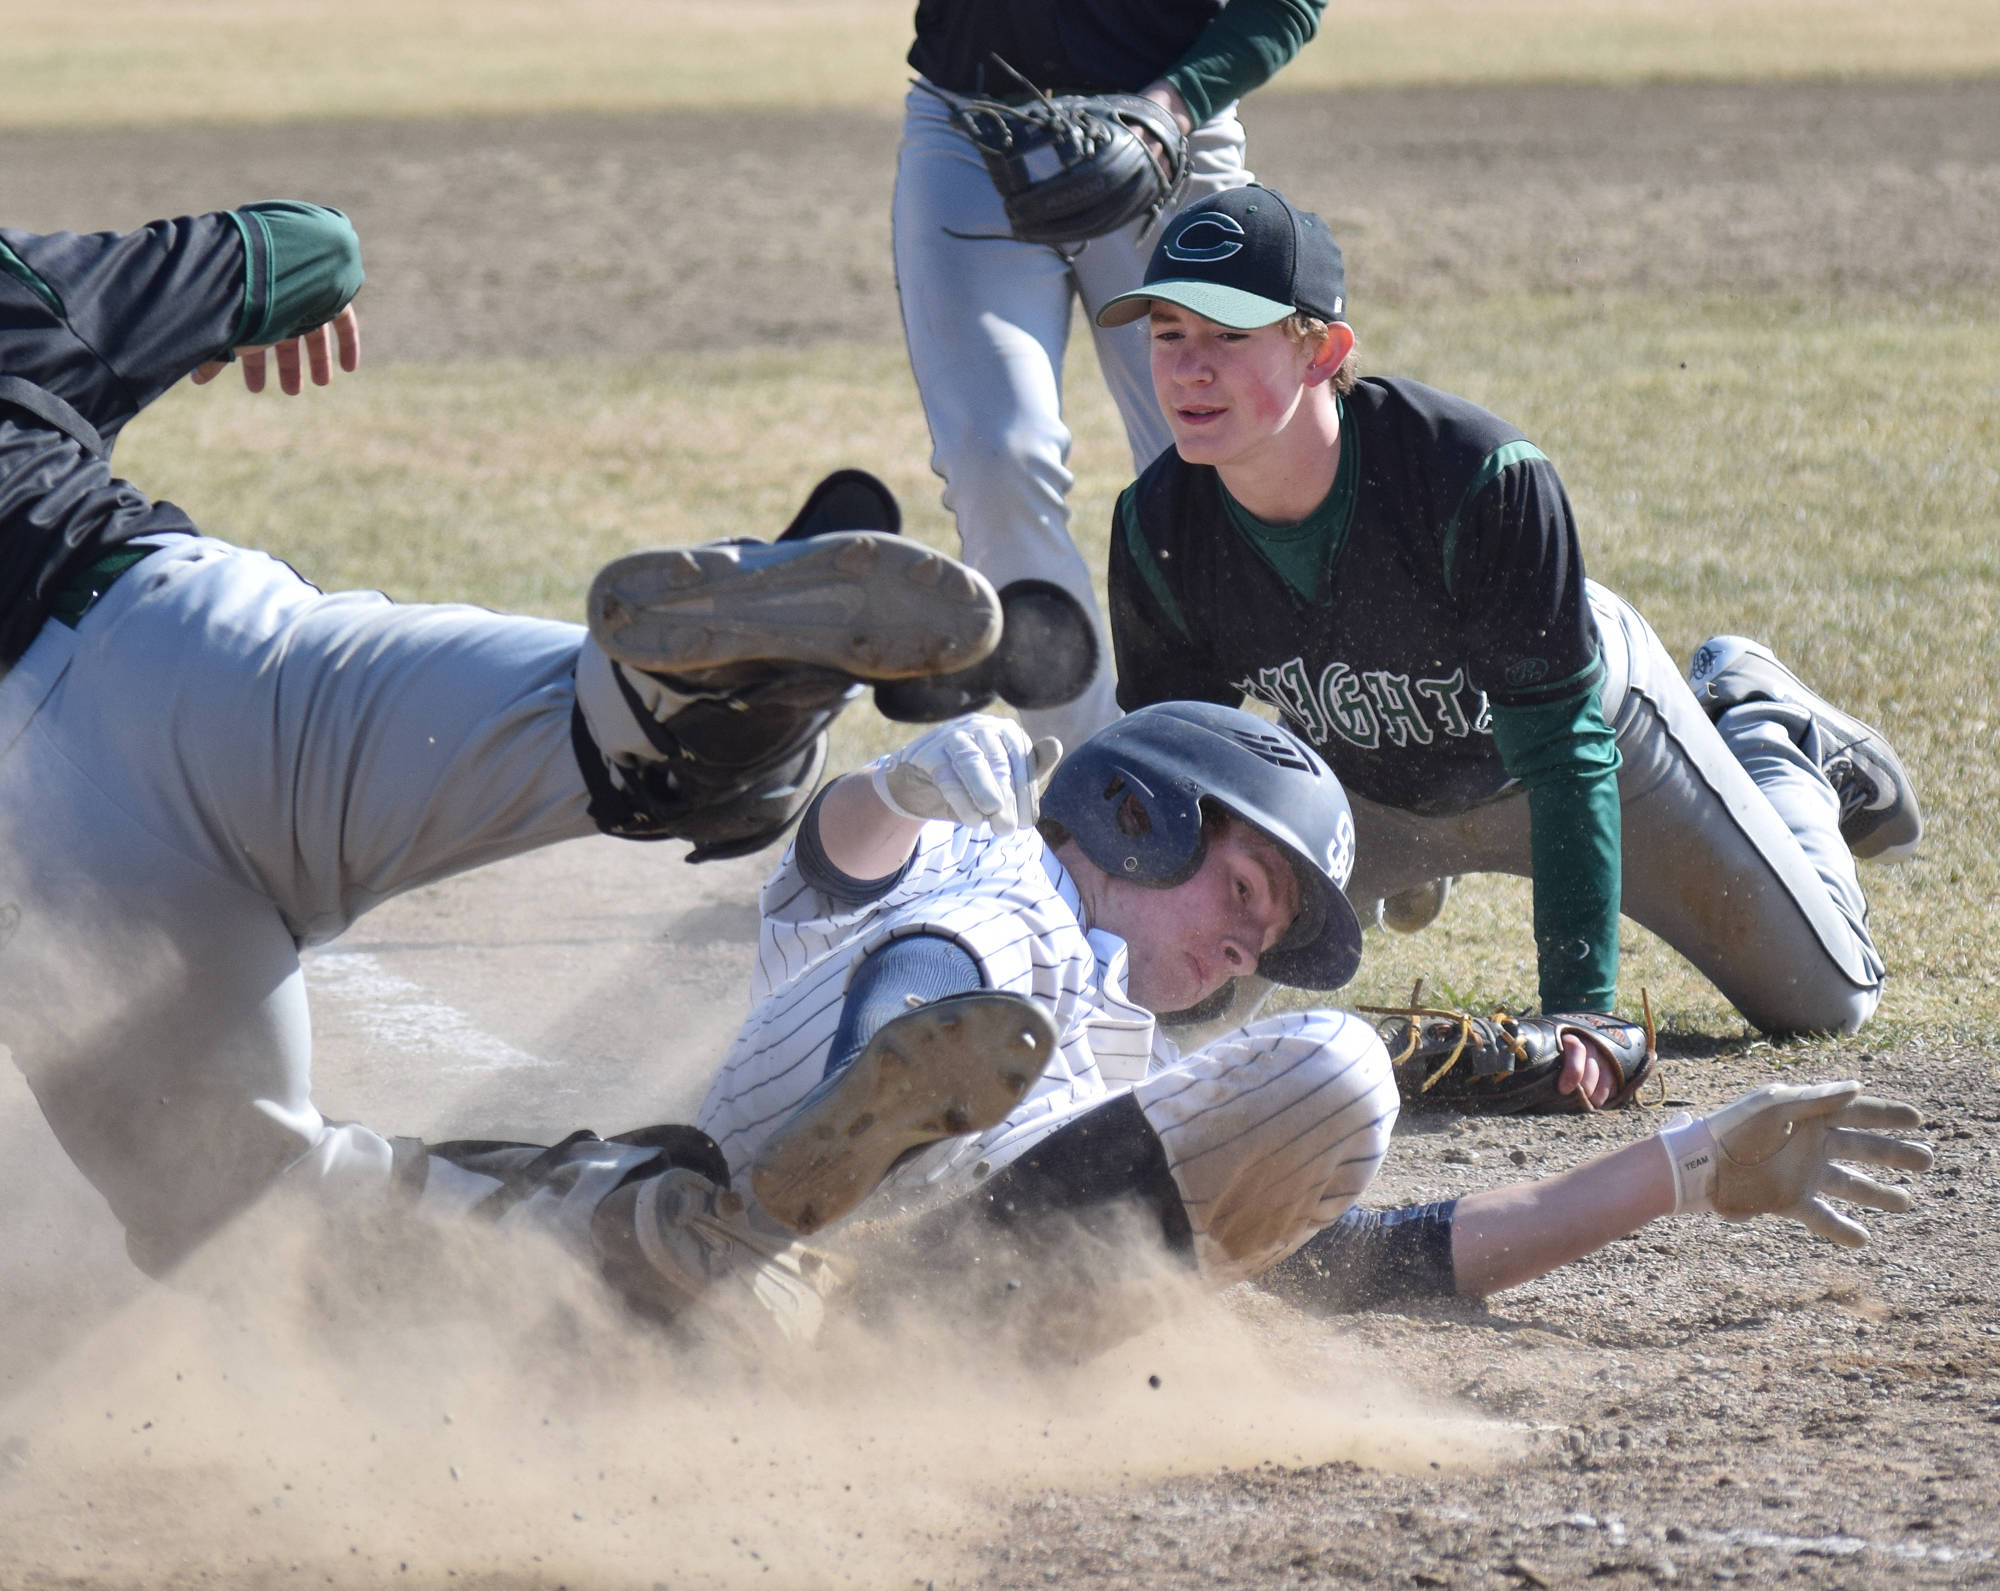 Soldotna’s Jeremy Kupferschmid slides safely to home plate to tie the game while Colony pitcher Trace Severson looks on, Tuesday afternoon at the Soldotna baseball fields. (Photo by Joey Klecka/Peninsula Clarion)